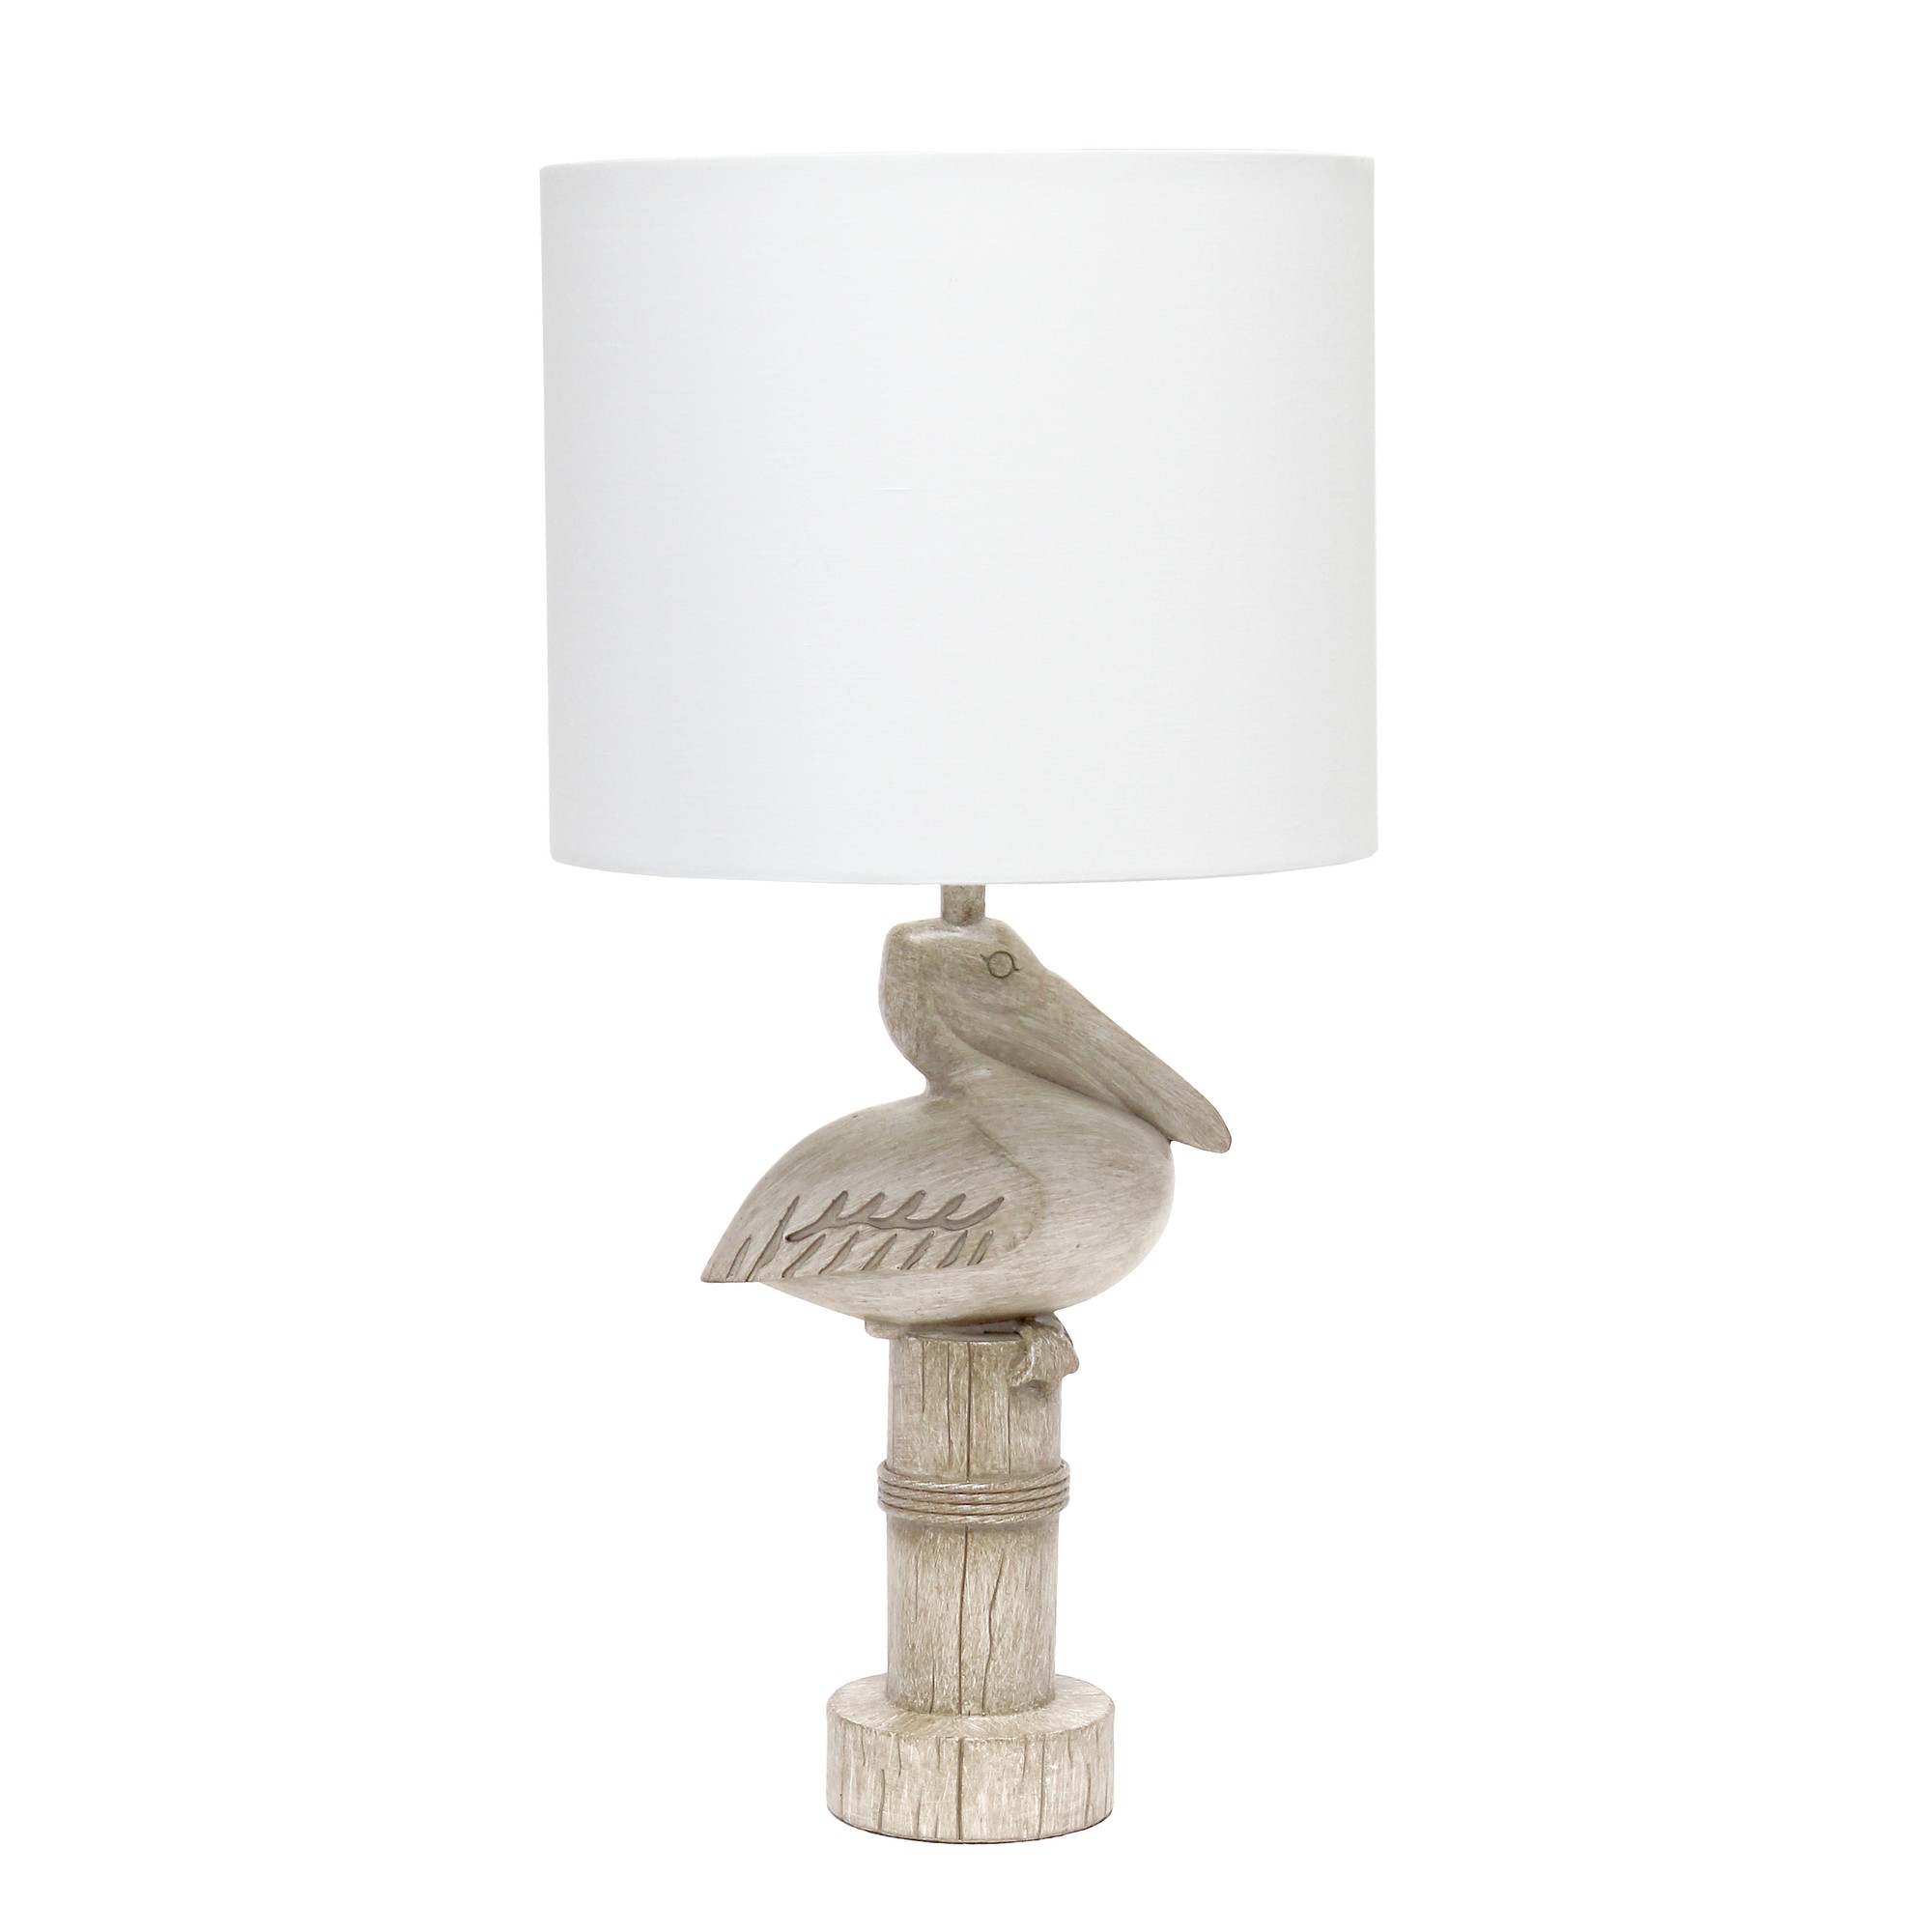 17.25" Tall Sitting Pelican Beige Wash Table Lamp